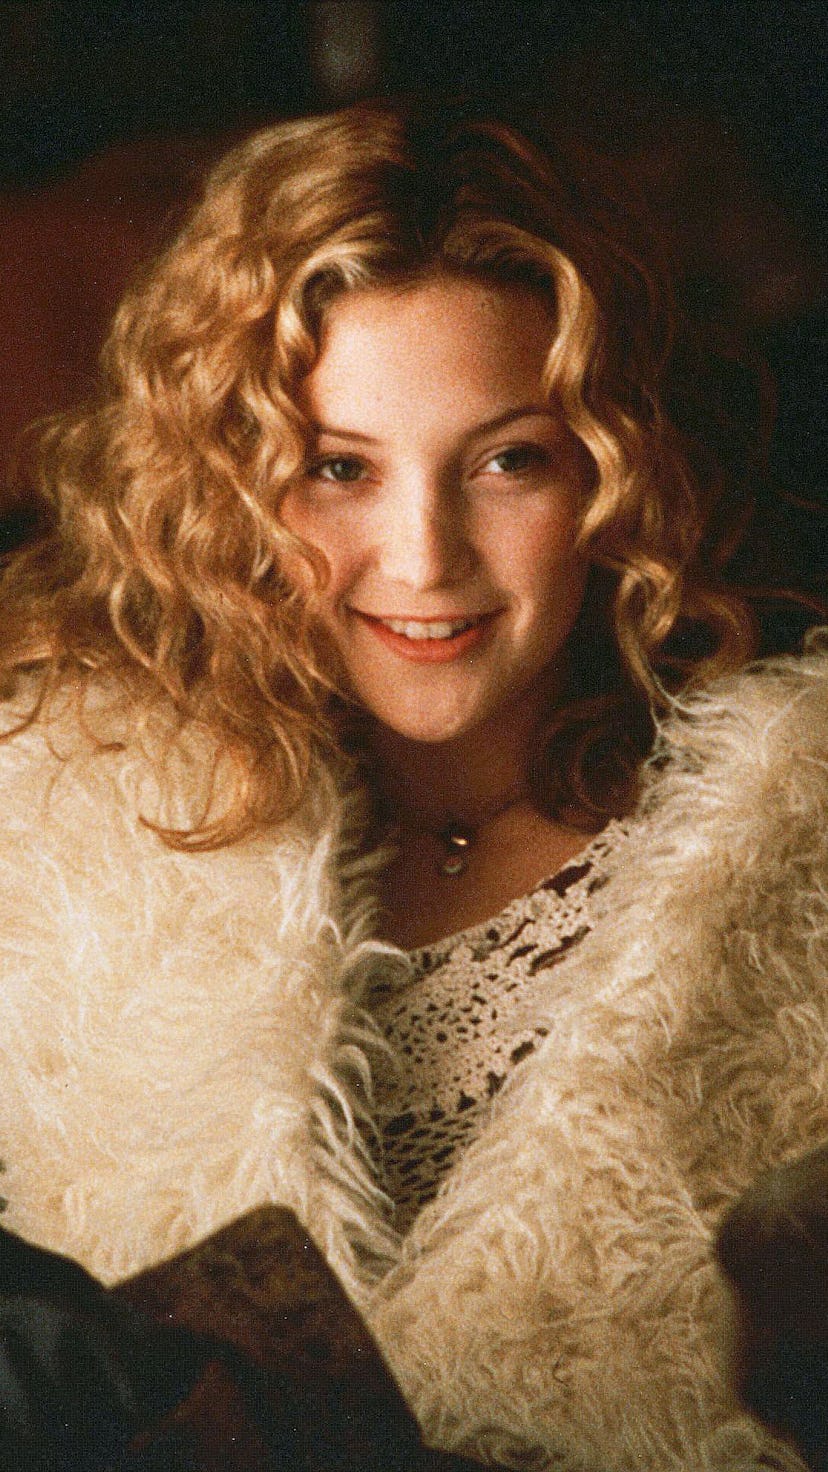 Kate Hudson in 2000's Almost Famous.